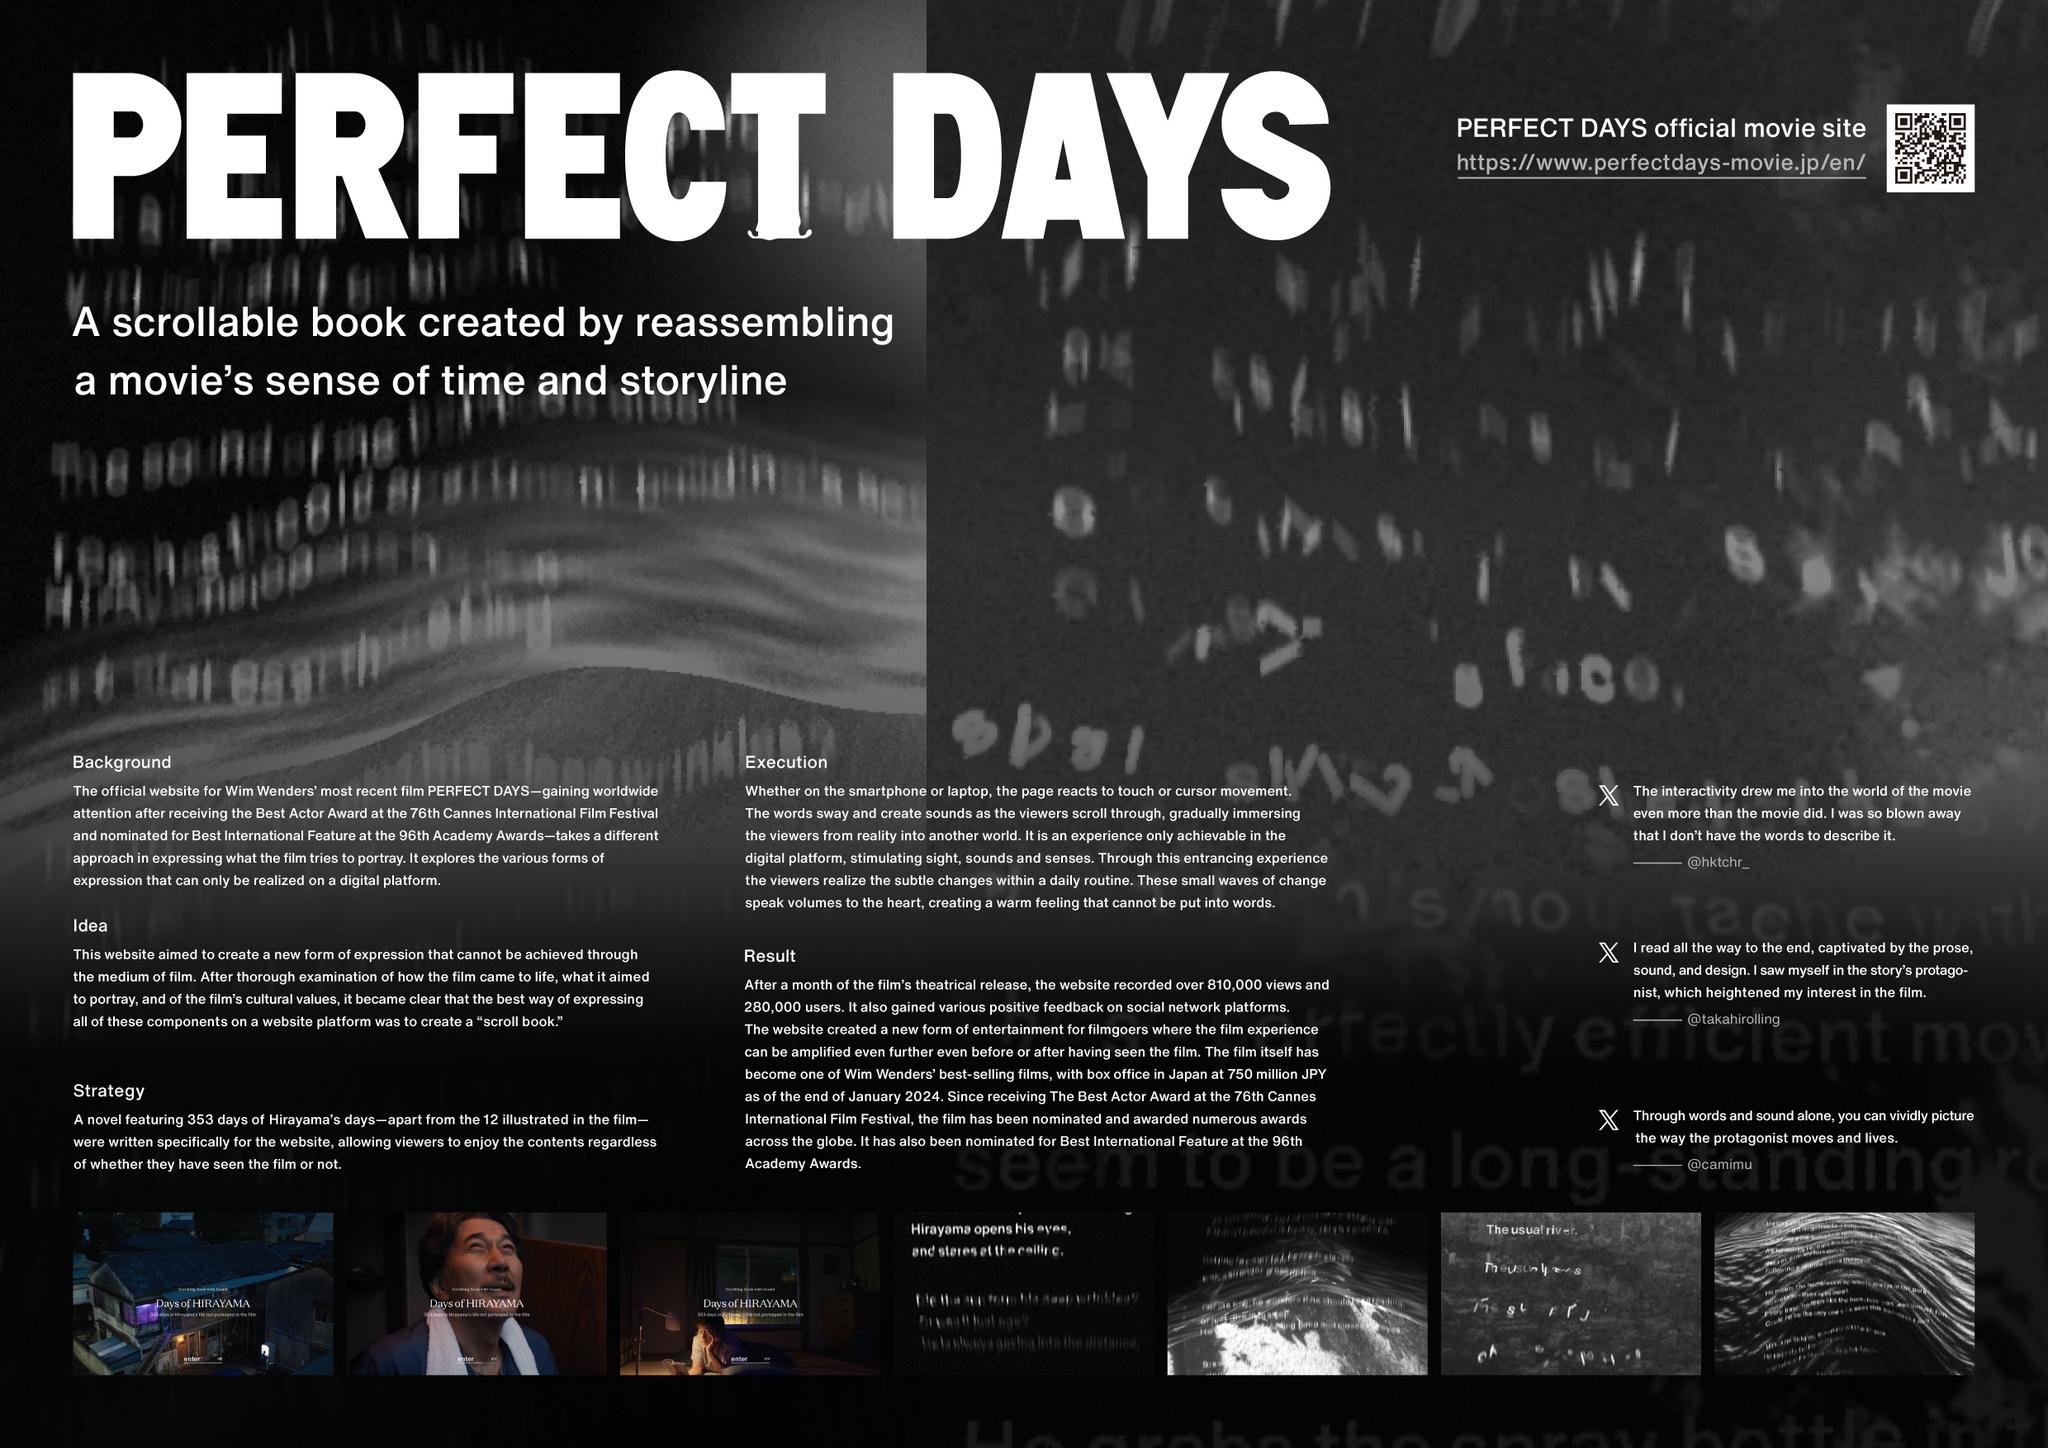 PERFECT DAYS OFFICIAL MOVIE SITE